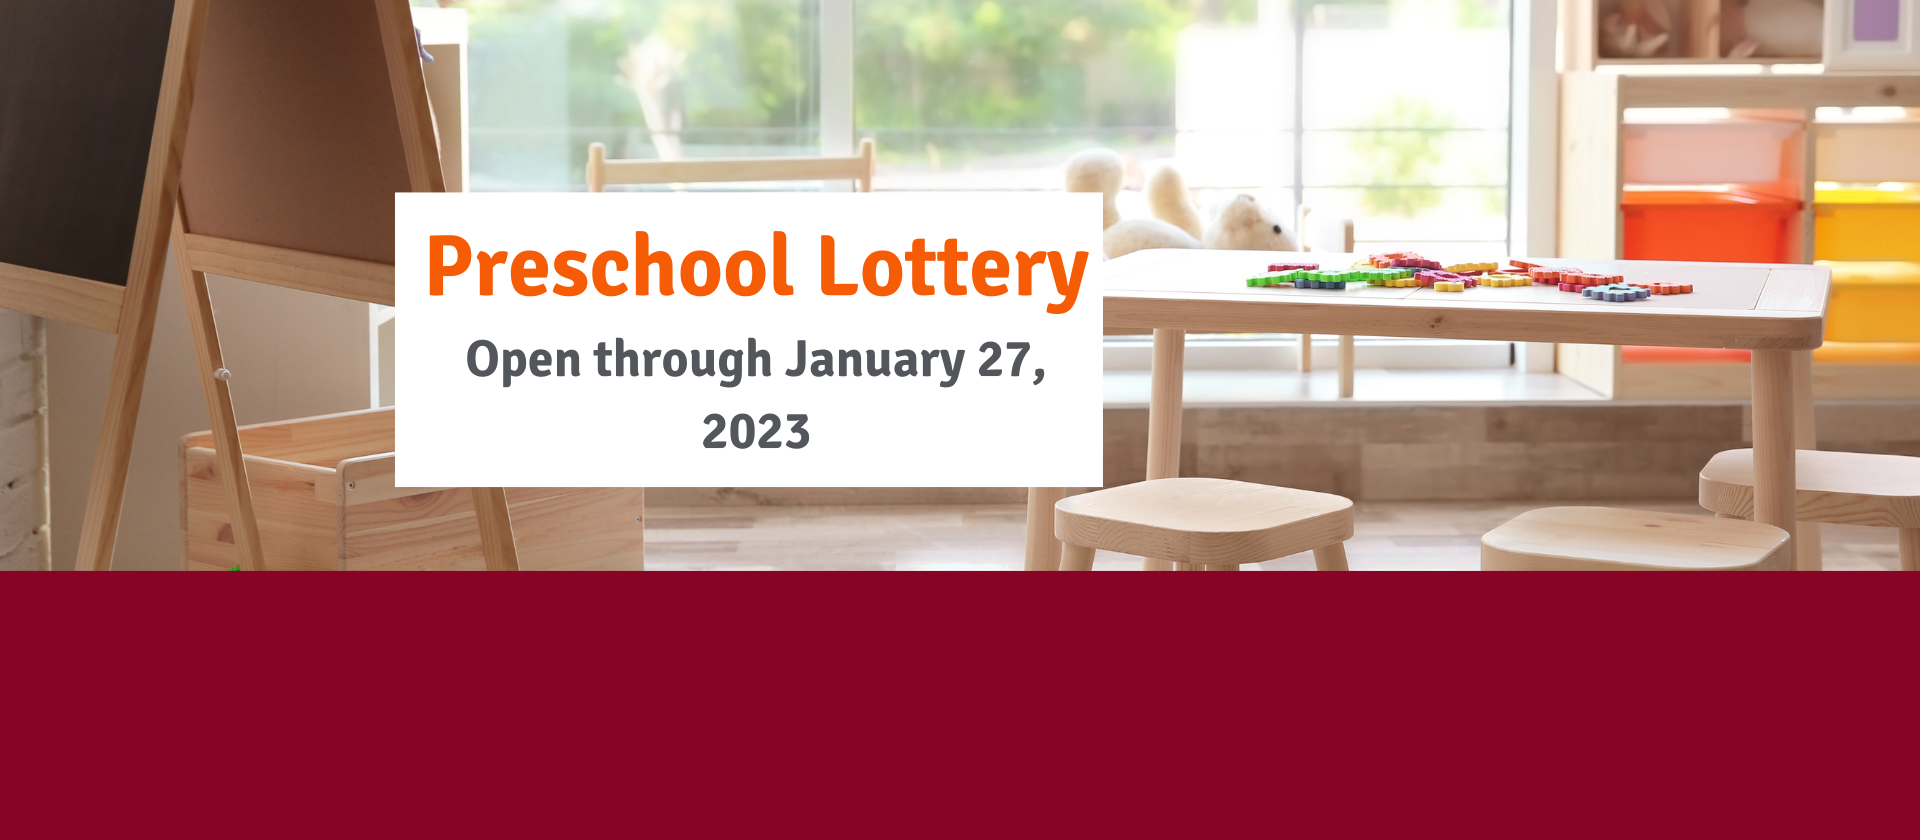 <h2>Preschool Lottery Open</h2>
<p>If you have a child turning 3 or 4 by Sept. 1, 2023, check out our preschool program!<br />
&nbsp;<br />
<a href="https://ec.bps101.net/preschool-program/" class="button ">Details Here</a></p>
